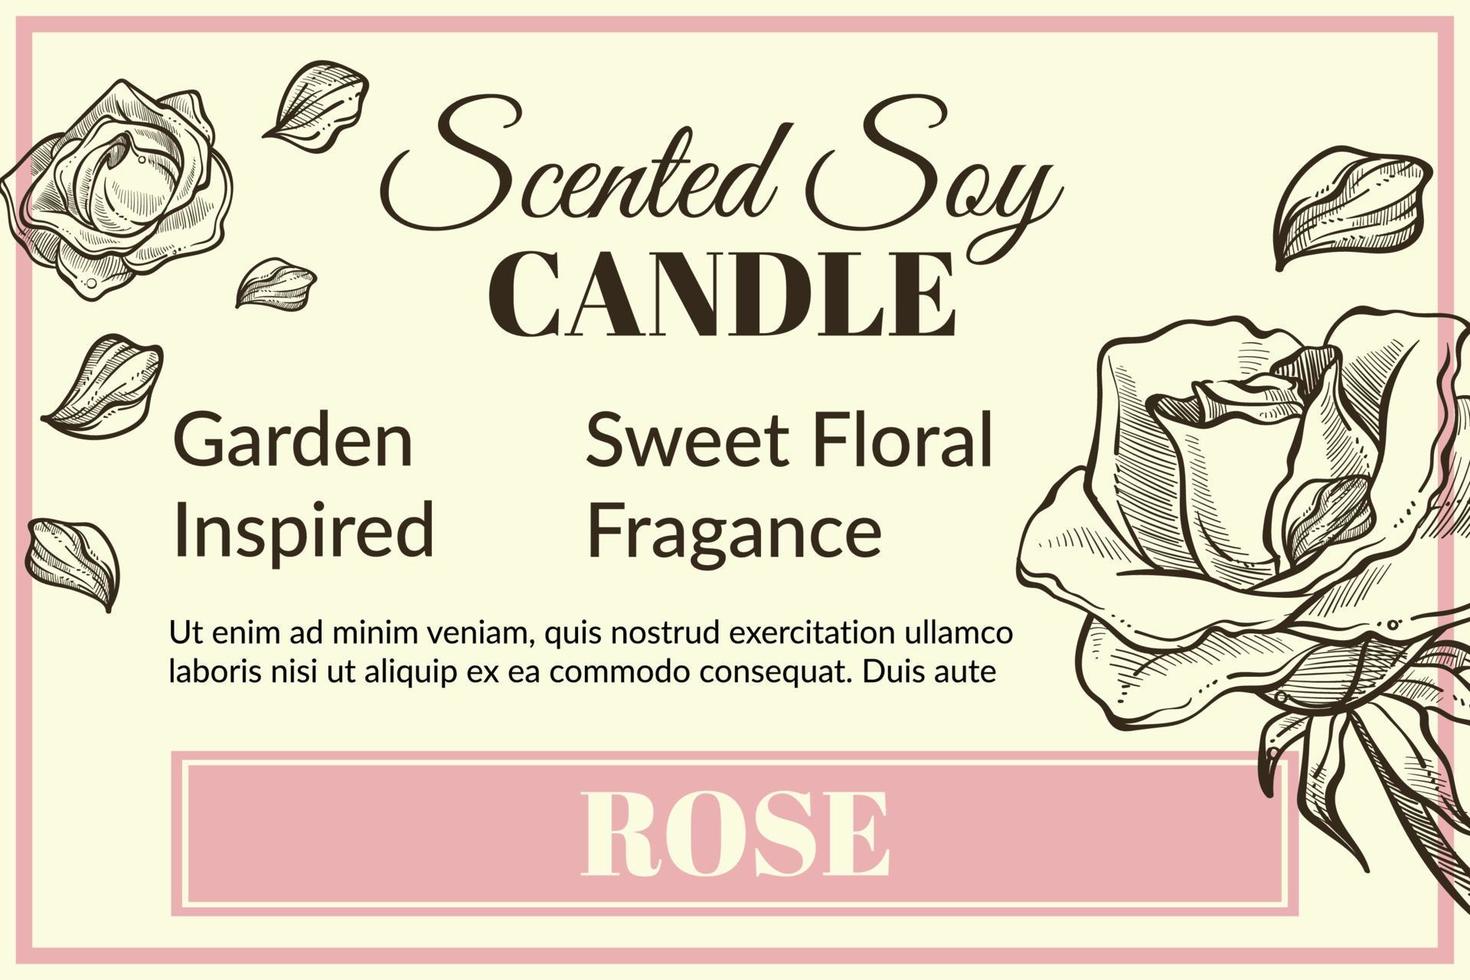 Scented soy candle with rose fragrance banner vector